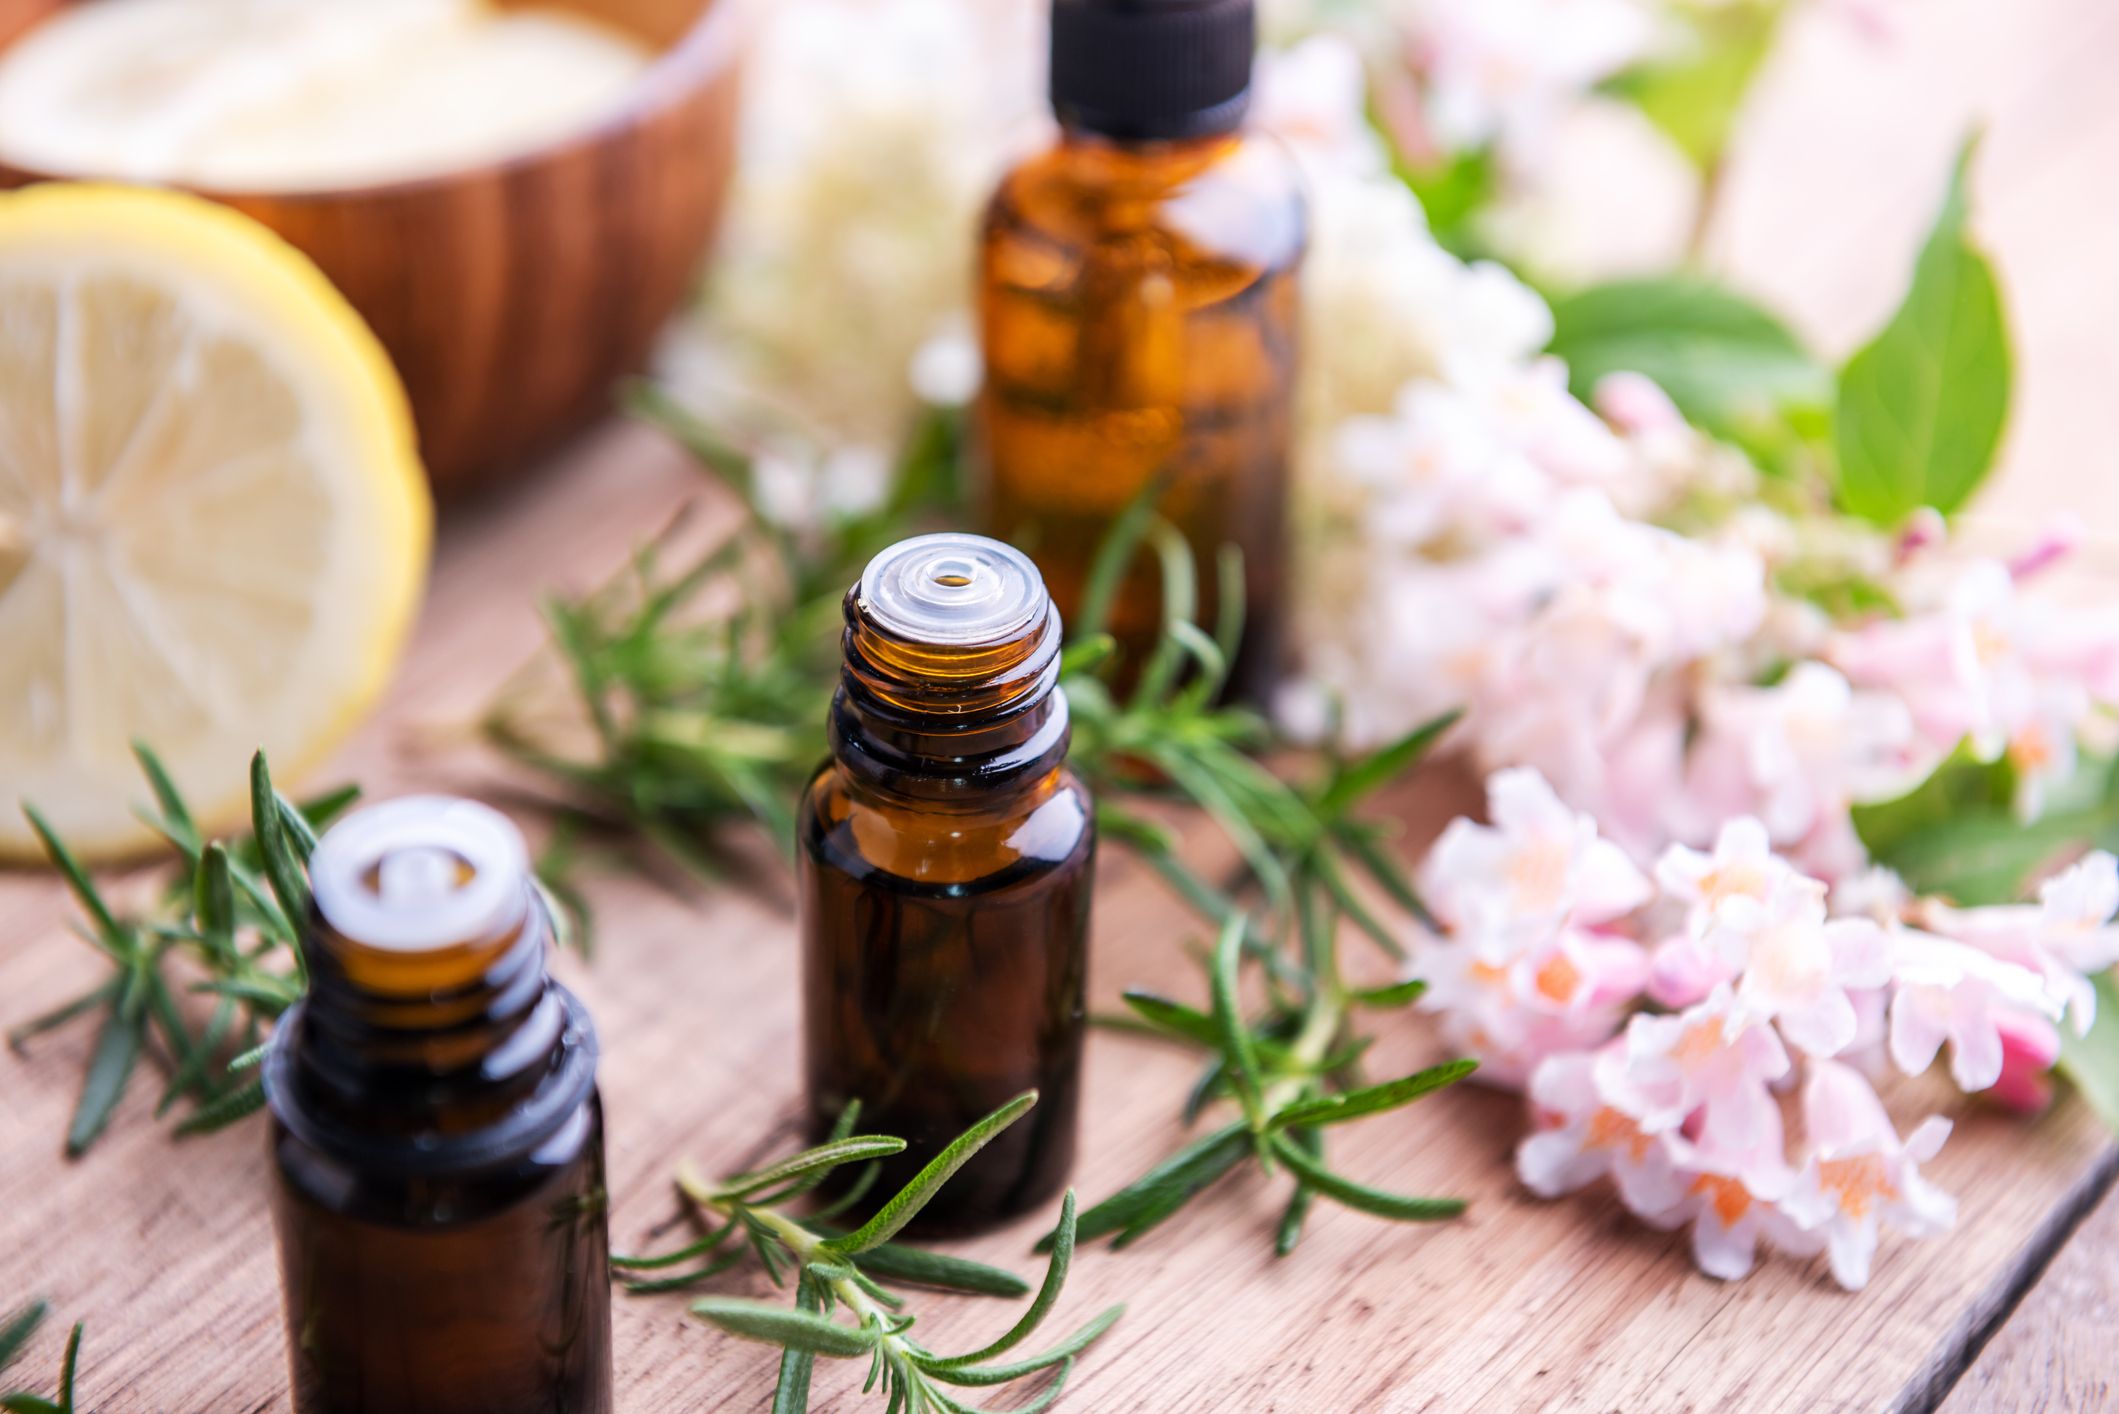 Rosemary Oil for Hair Growth? Dermatologists Aren't Convinced